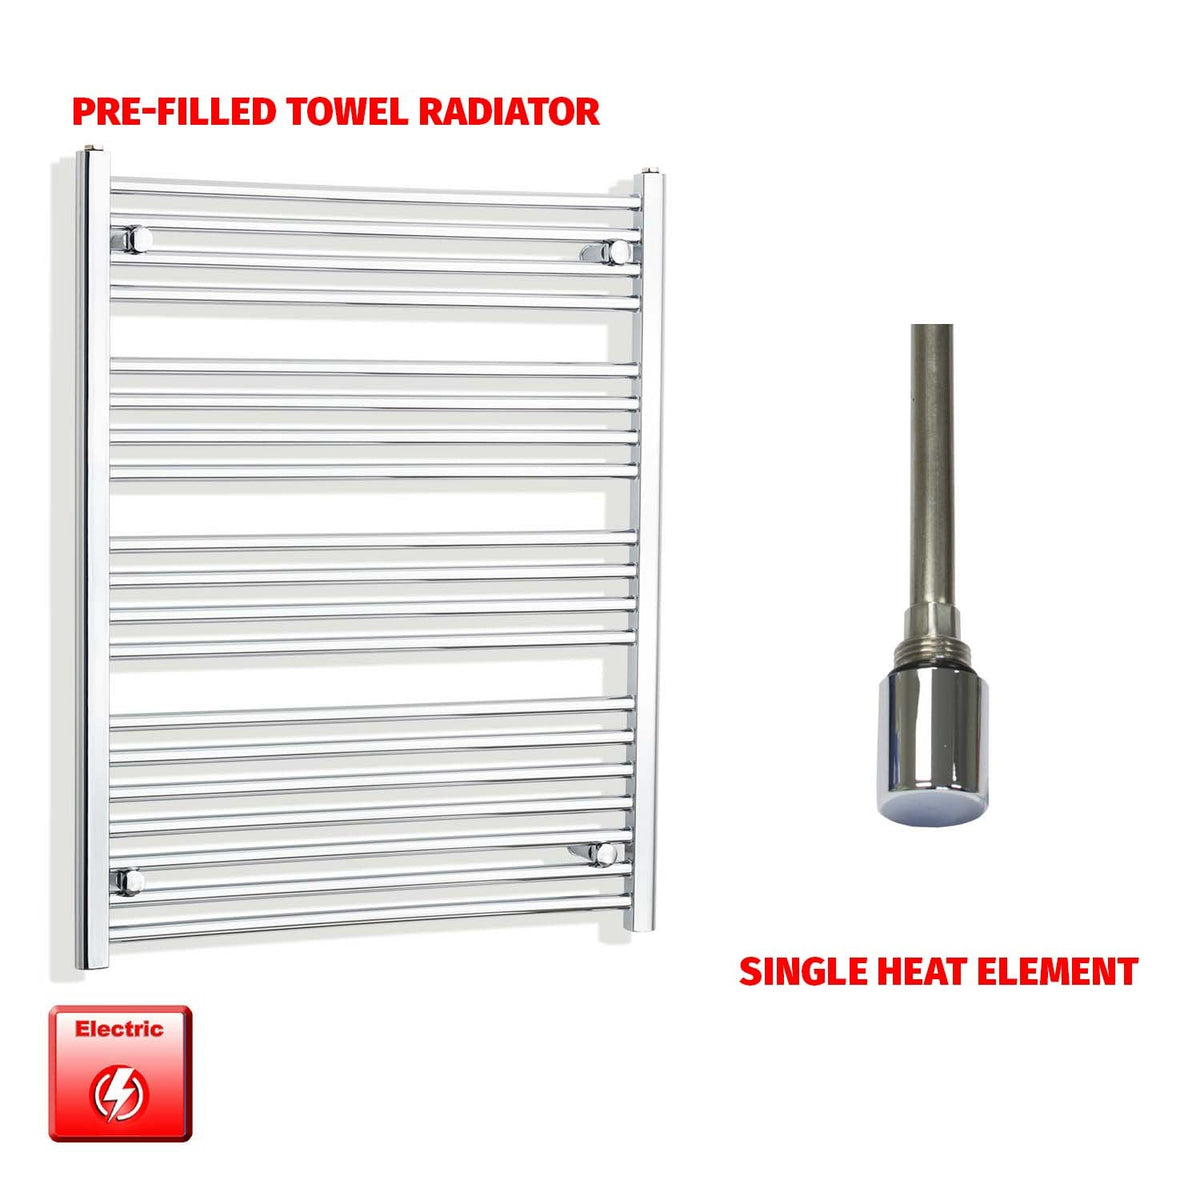 1000 x 750 Pre-Filled Electric Heated Towel Radiator Curved or Straight Chrome Single heat element no timer